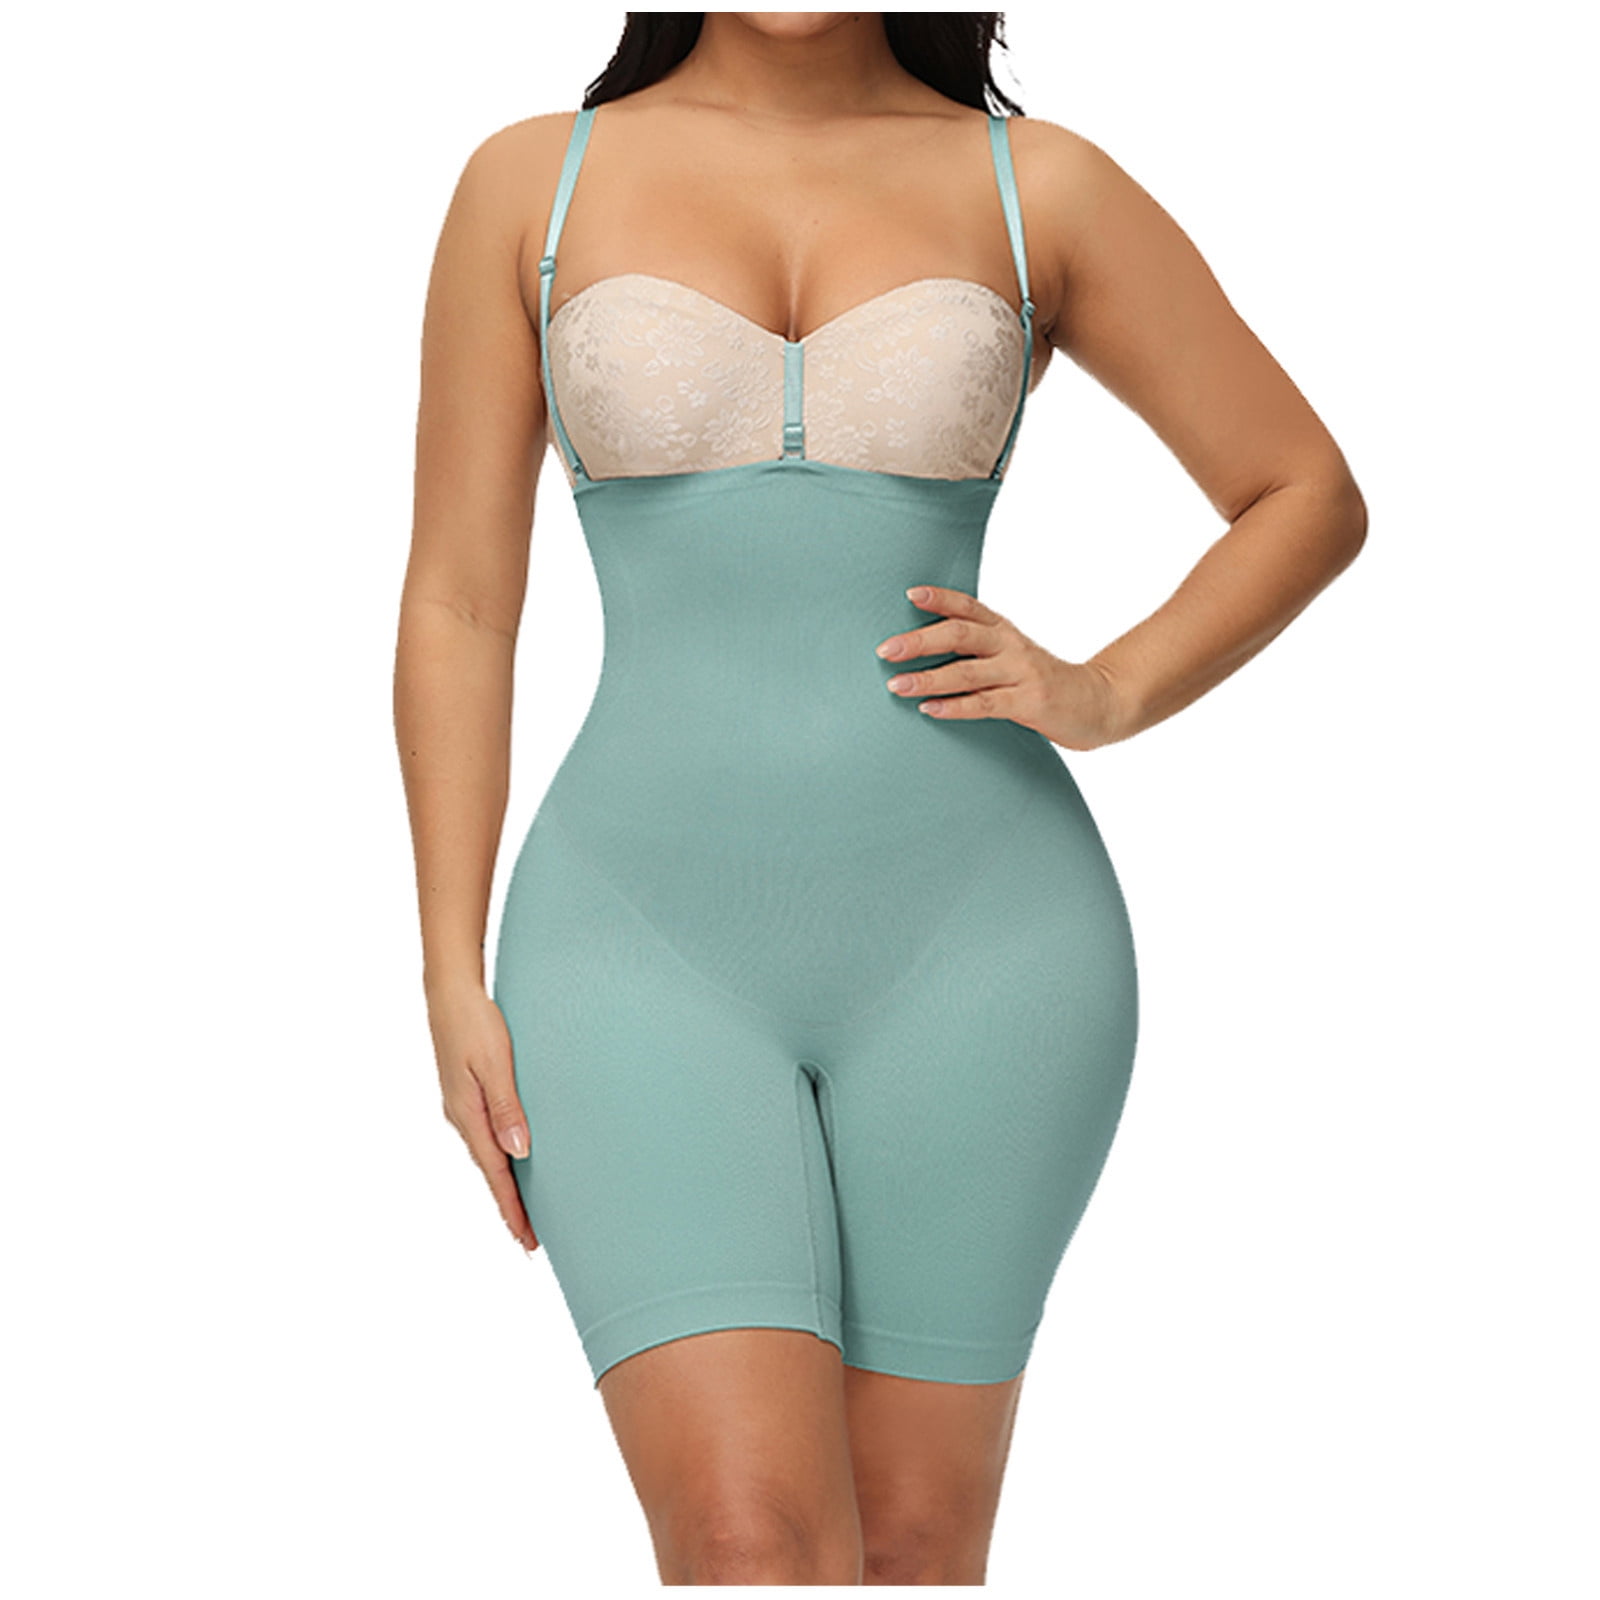 COLD LYCRA BODY SHAPER - Silhouettes and Curves